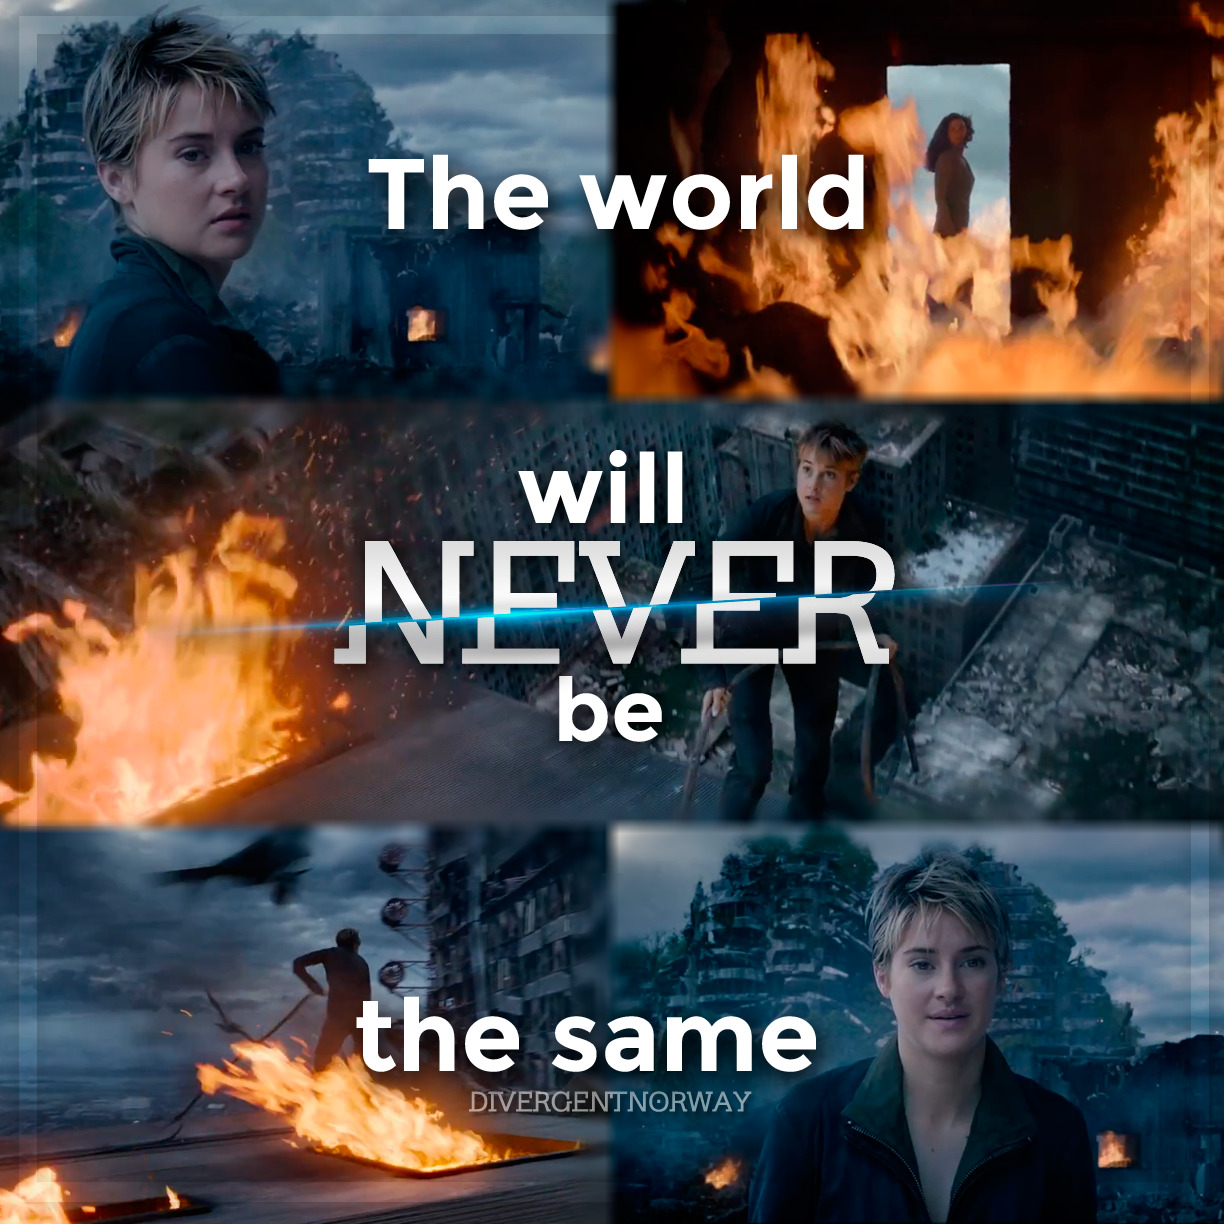 Divergent Norge - The very first Insurgent teaser is here! What do.